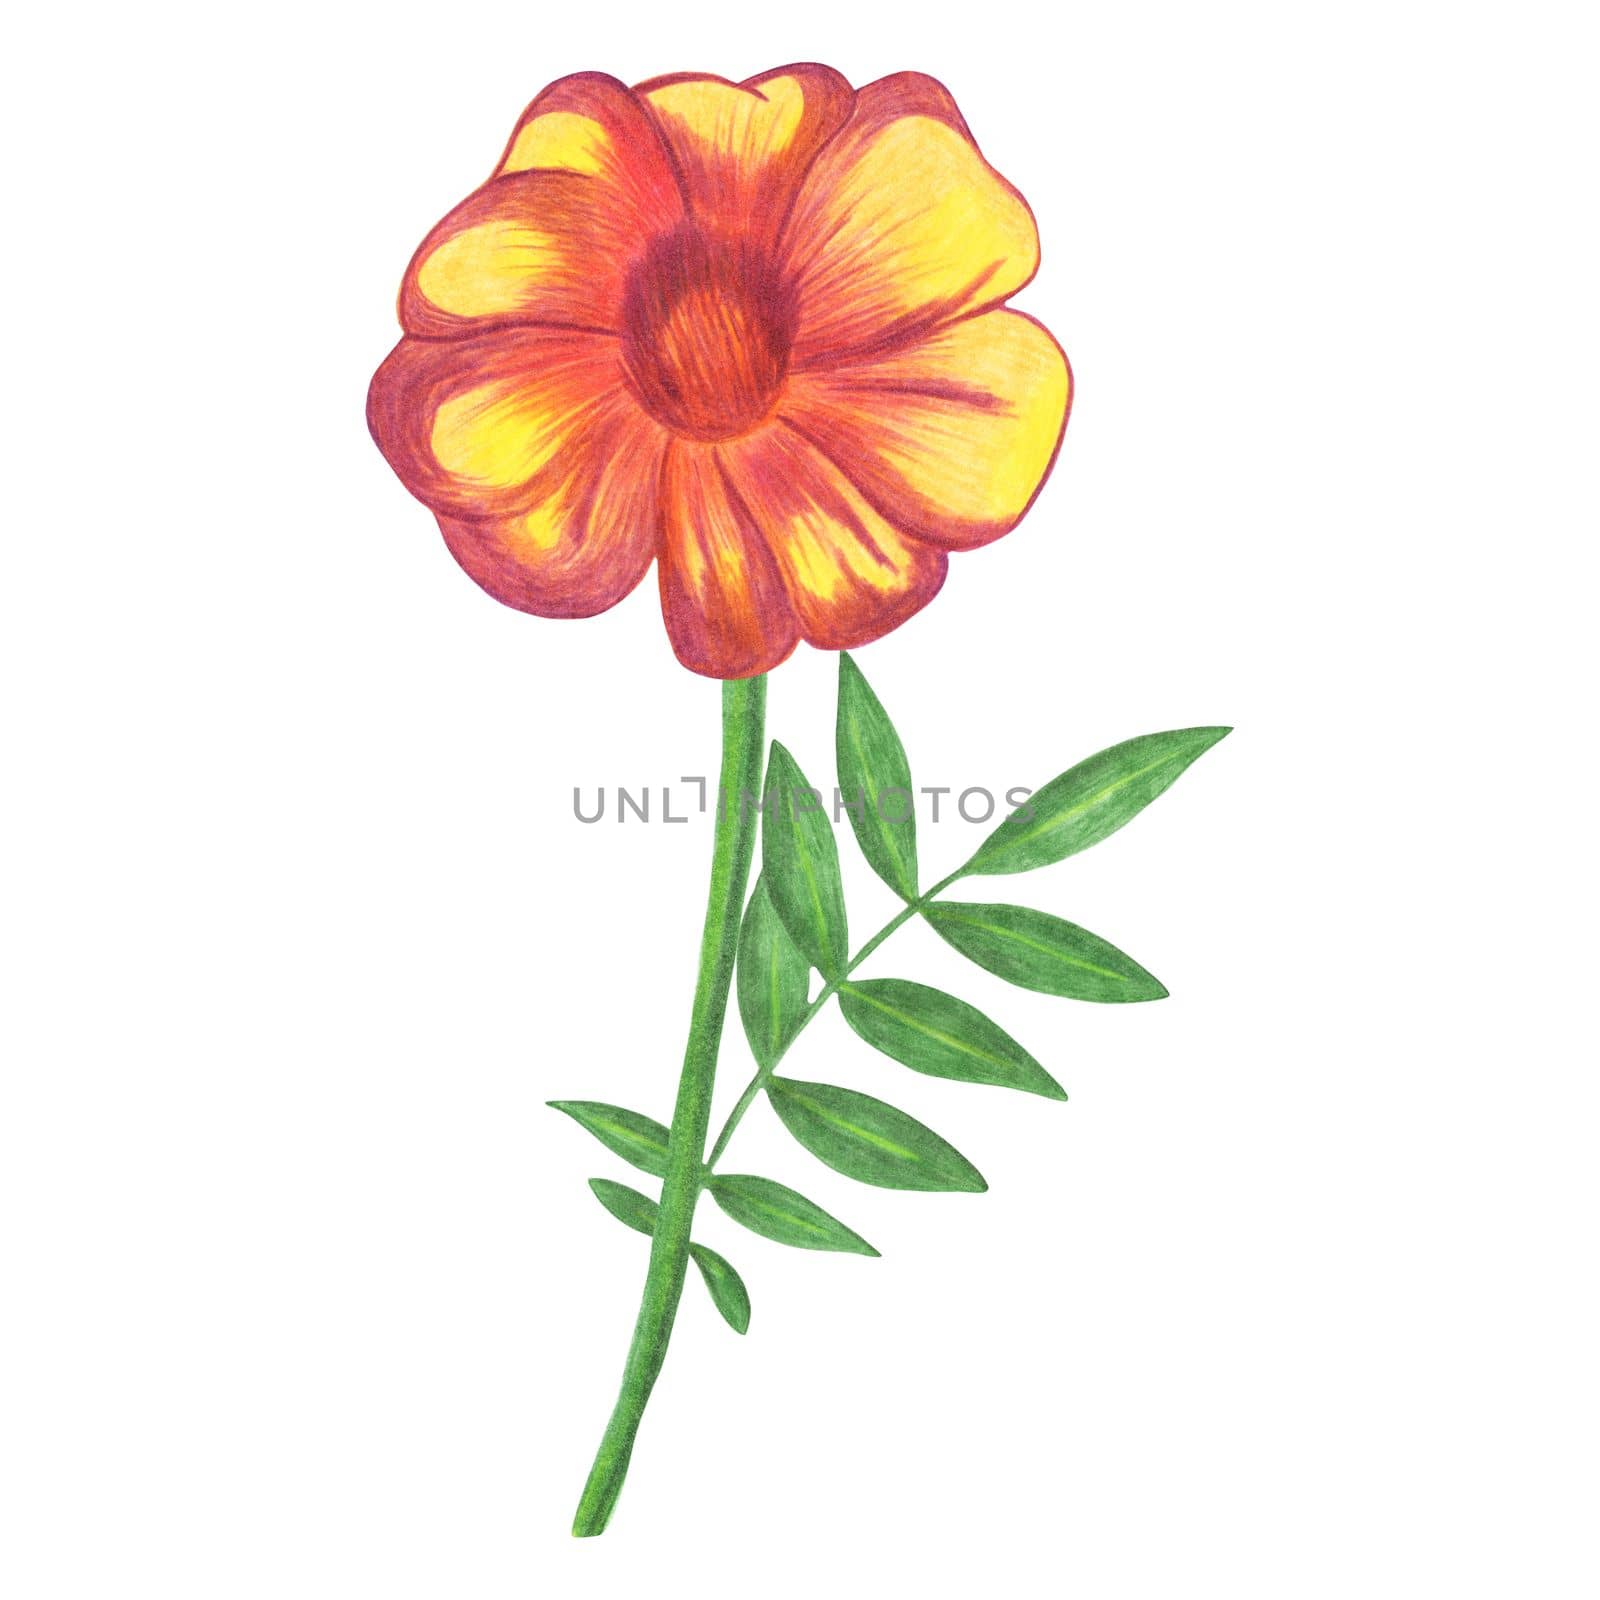 Red Marigold with Green Leaves Isolated on White Background. Marigold Flower Element Drawn by Colored Pencil.